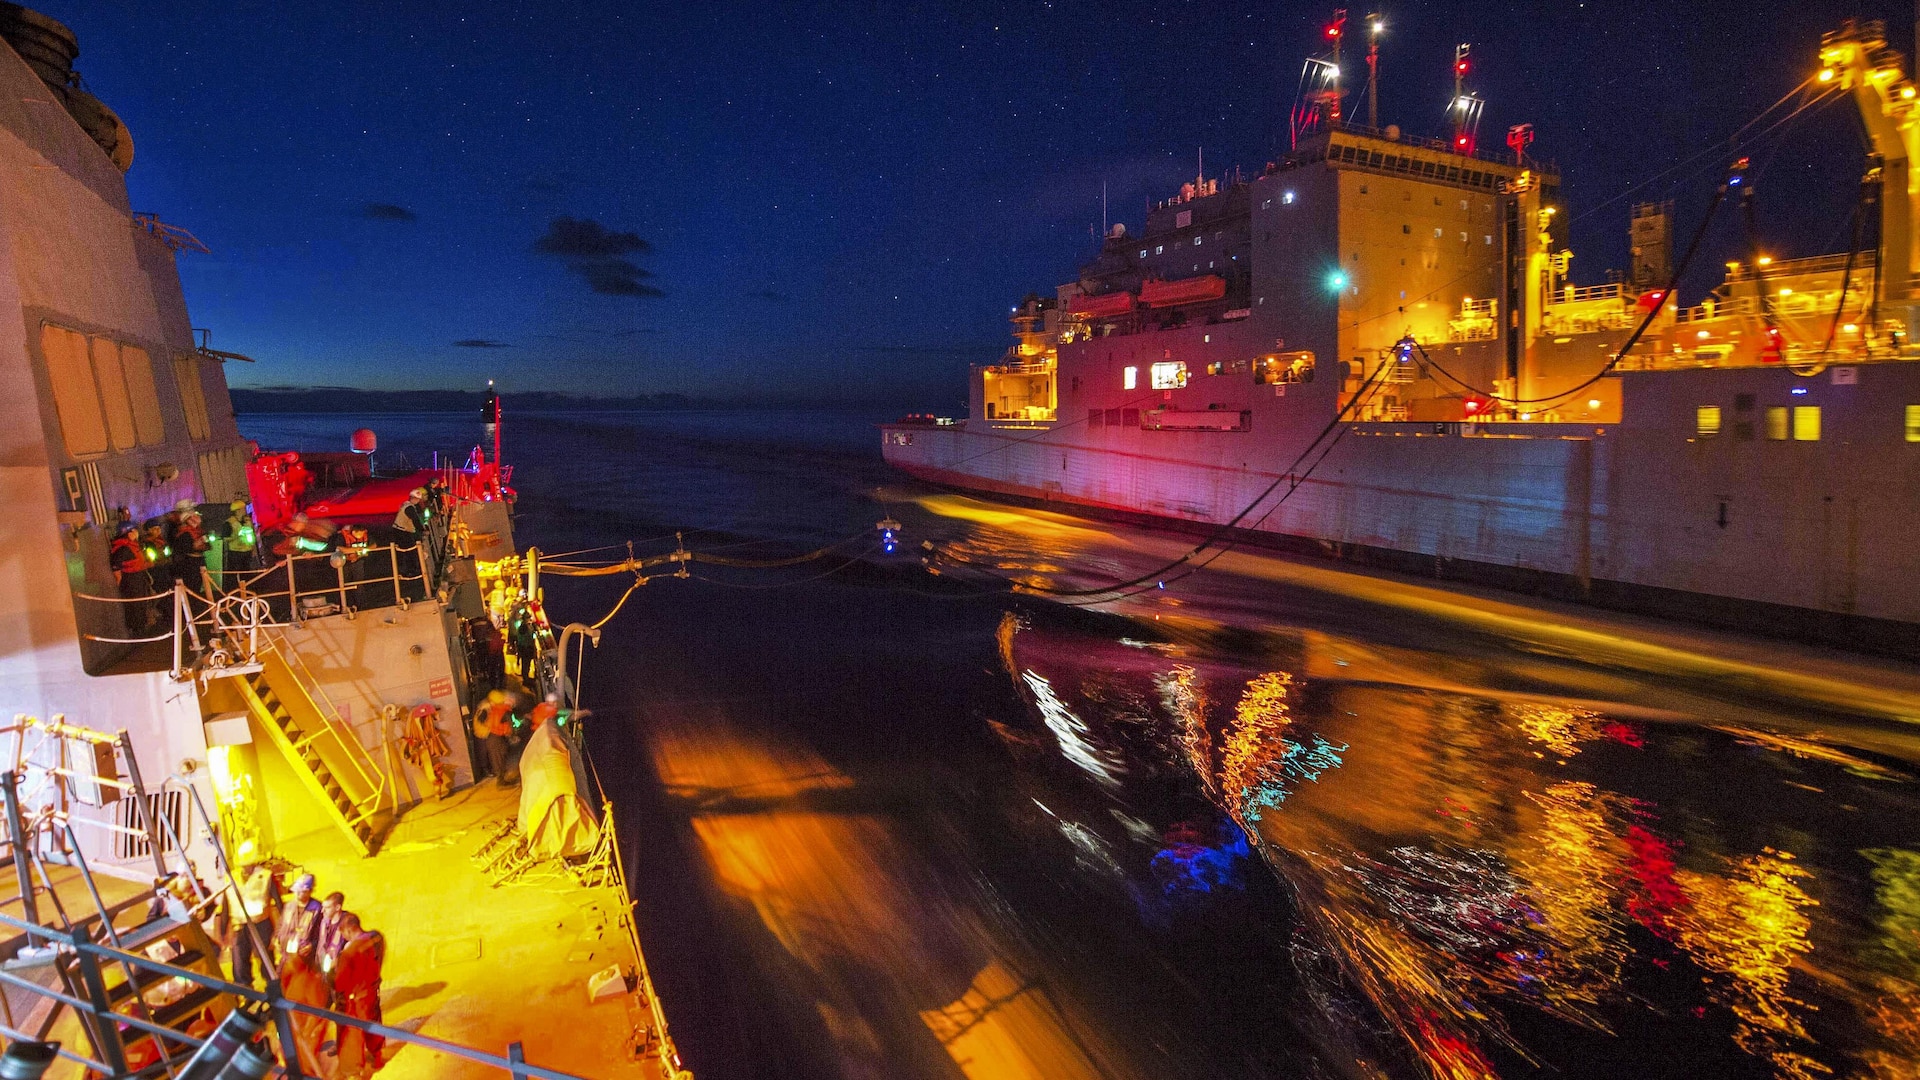 PACIFIC OCEAN (June 24, 2017) The Arleigh Burke-class guided-missile destroyer USS McCampbell (DDG 85) conducts a replenishment-at-sea with the dry cargo and ammunition ship USNS Richard E. Byrd (T-AKE 4). McCampbell is on patrol in the U.S. 7th Fleet area of operations in support of security and stability in the Indo-Asia-Pacific region. (U.S. Navy photo by Mass Communication Specialist 2nd Class Jeremy Graham/Released)